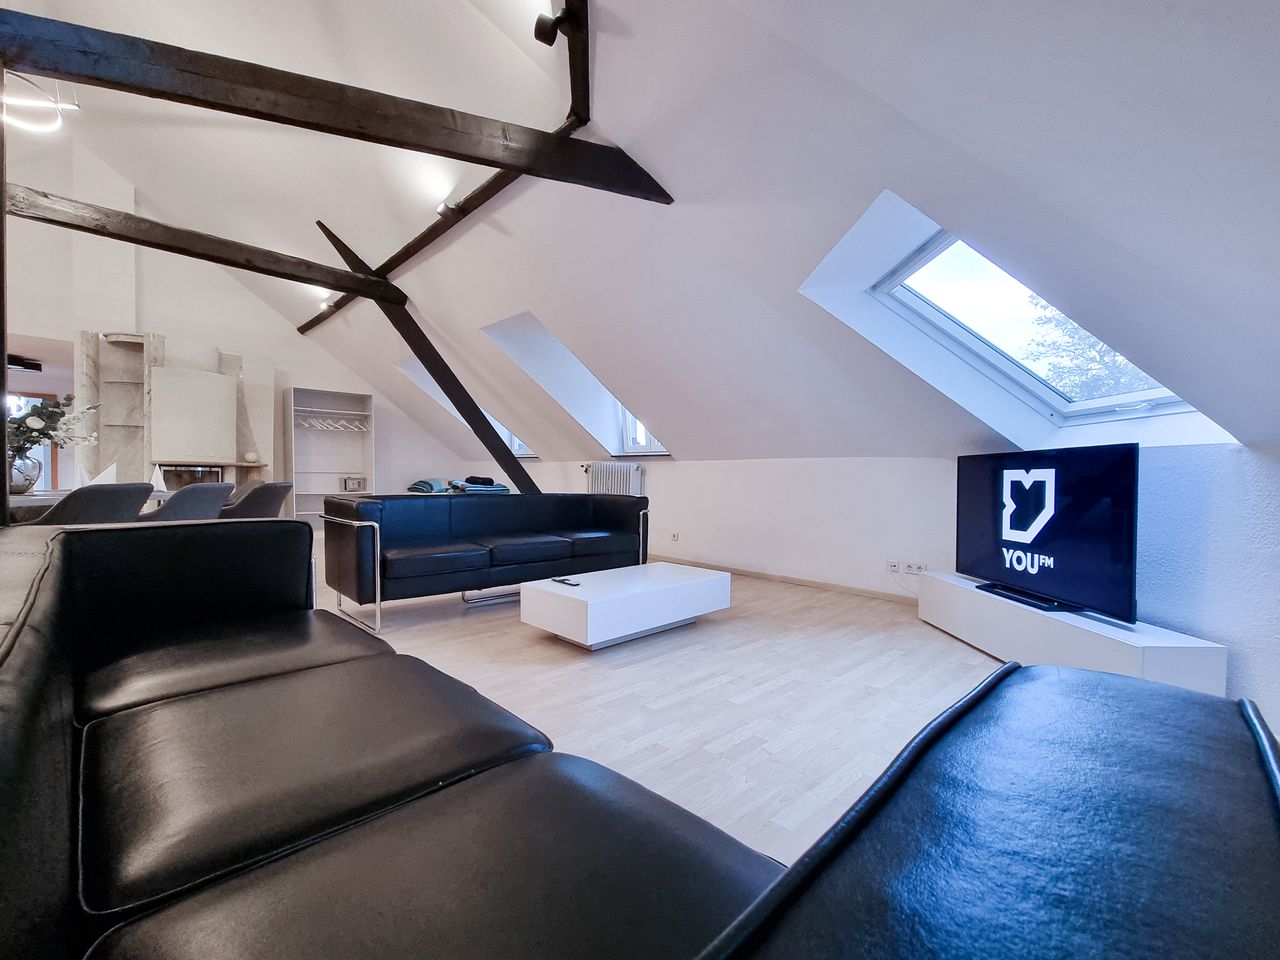 128m² attic apartment with 8 beds + balcony in Krefeld